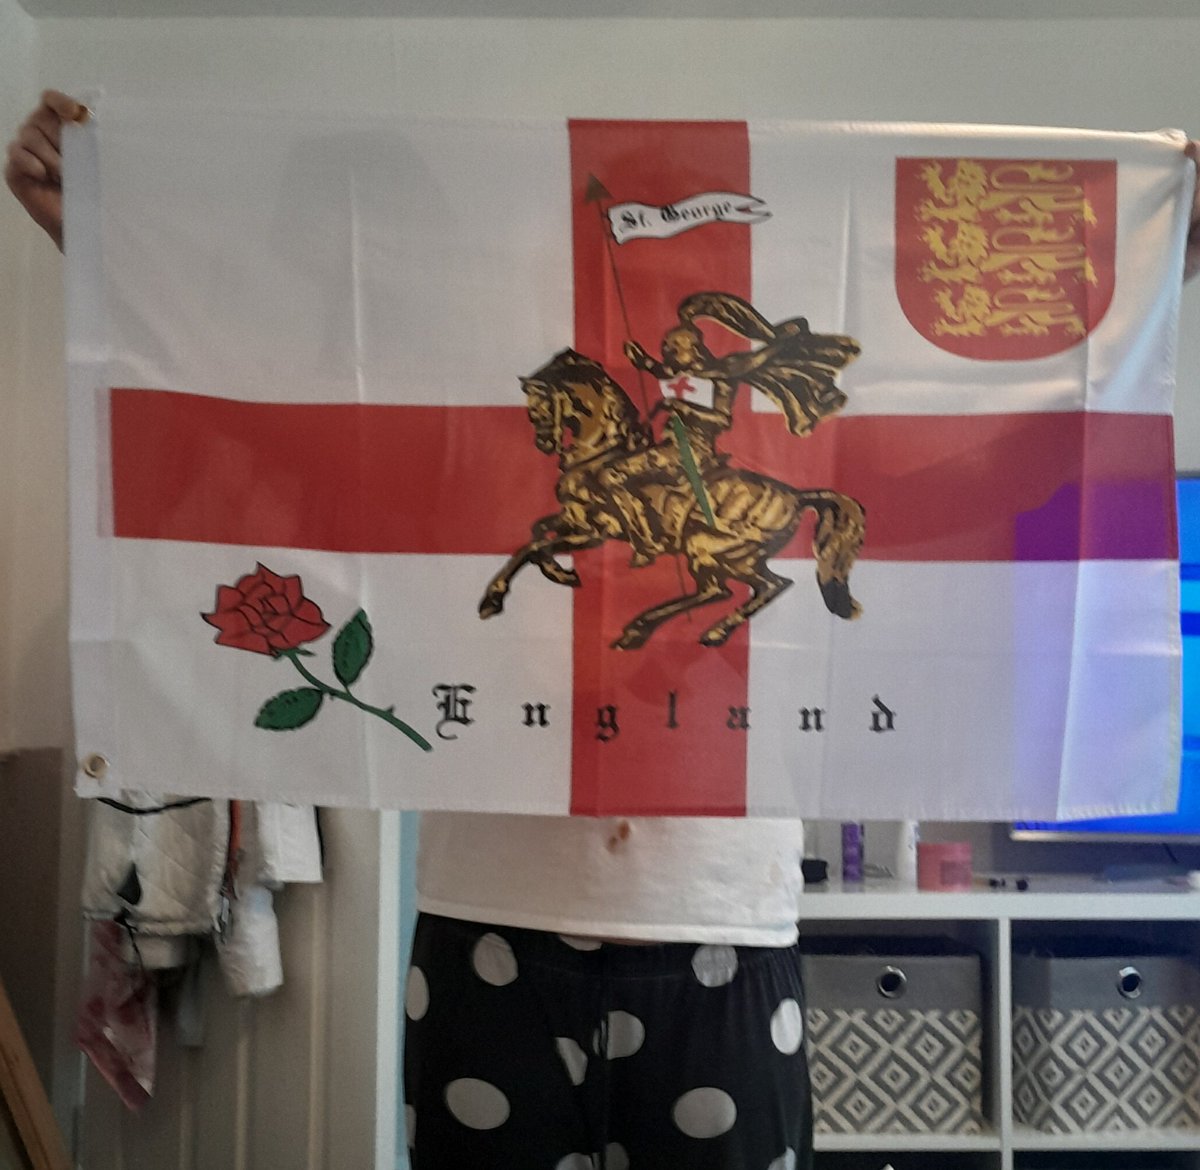 Me new England flag for tomorrow held by my beautiful daughter @Shannoncarruth3 and just under that is my 1st grandchild coming tp us soon .. And I want him to be able to be happy in our country not worry about Muslims all his life xx